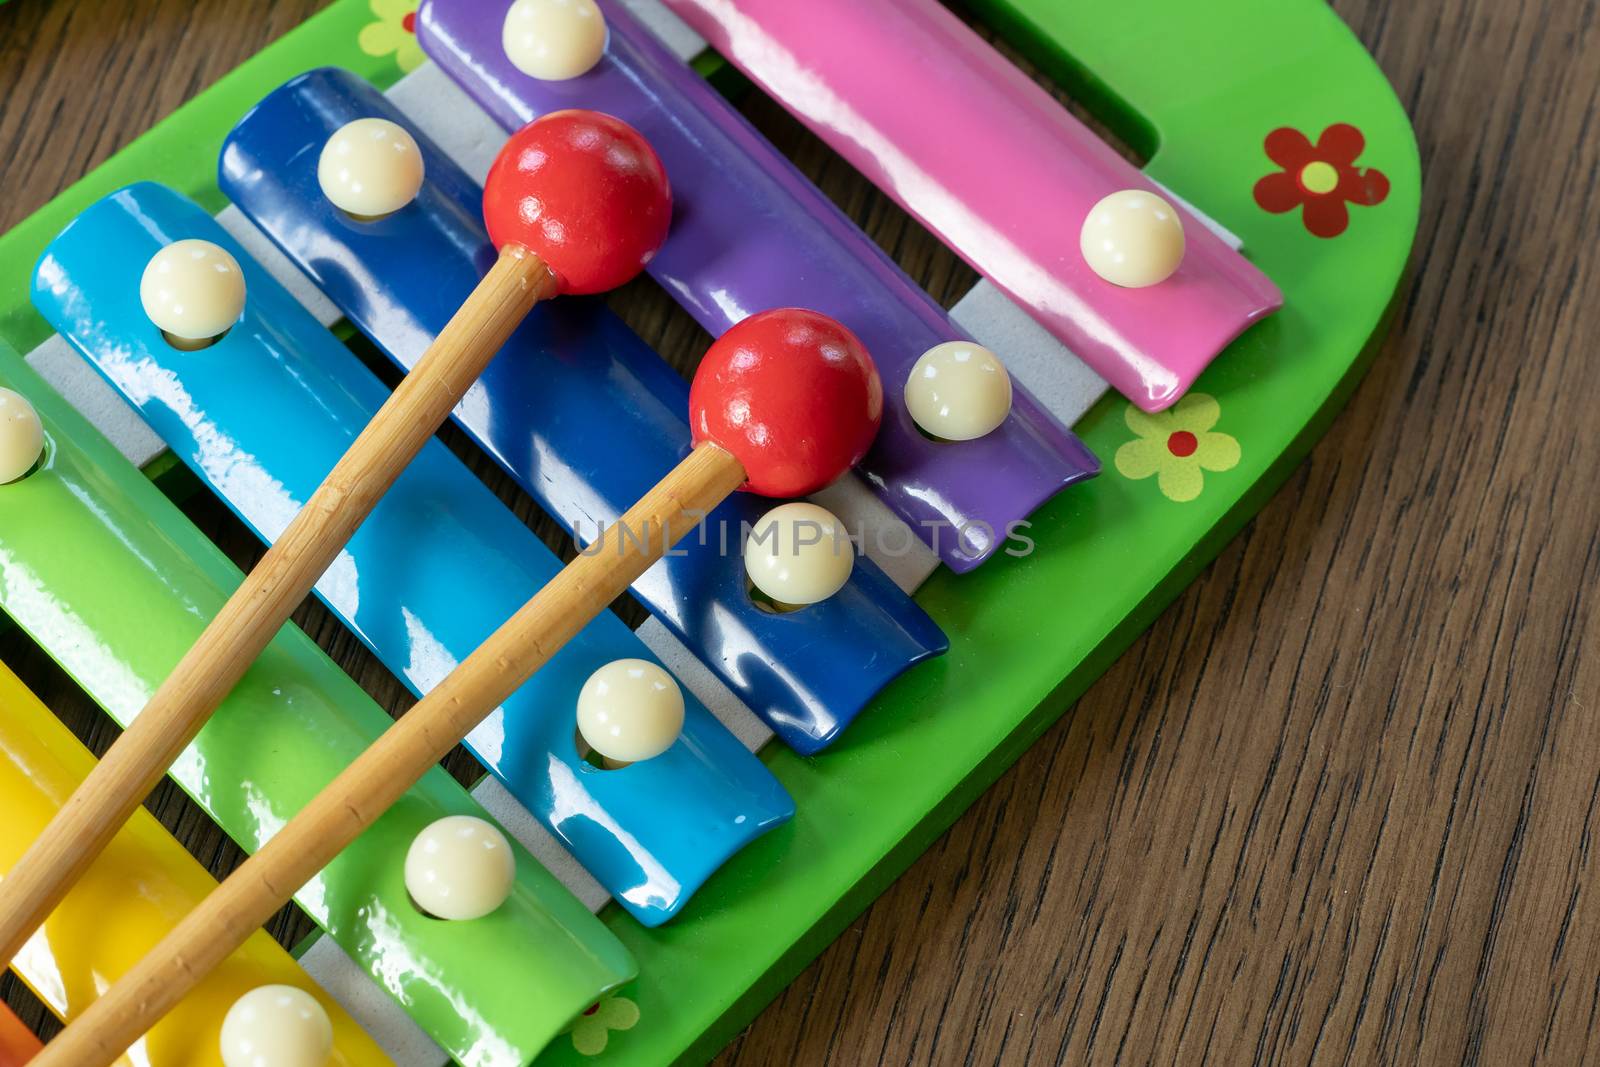 Musical instrument xylophone. Rainbow colored toy xylophone.